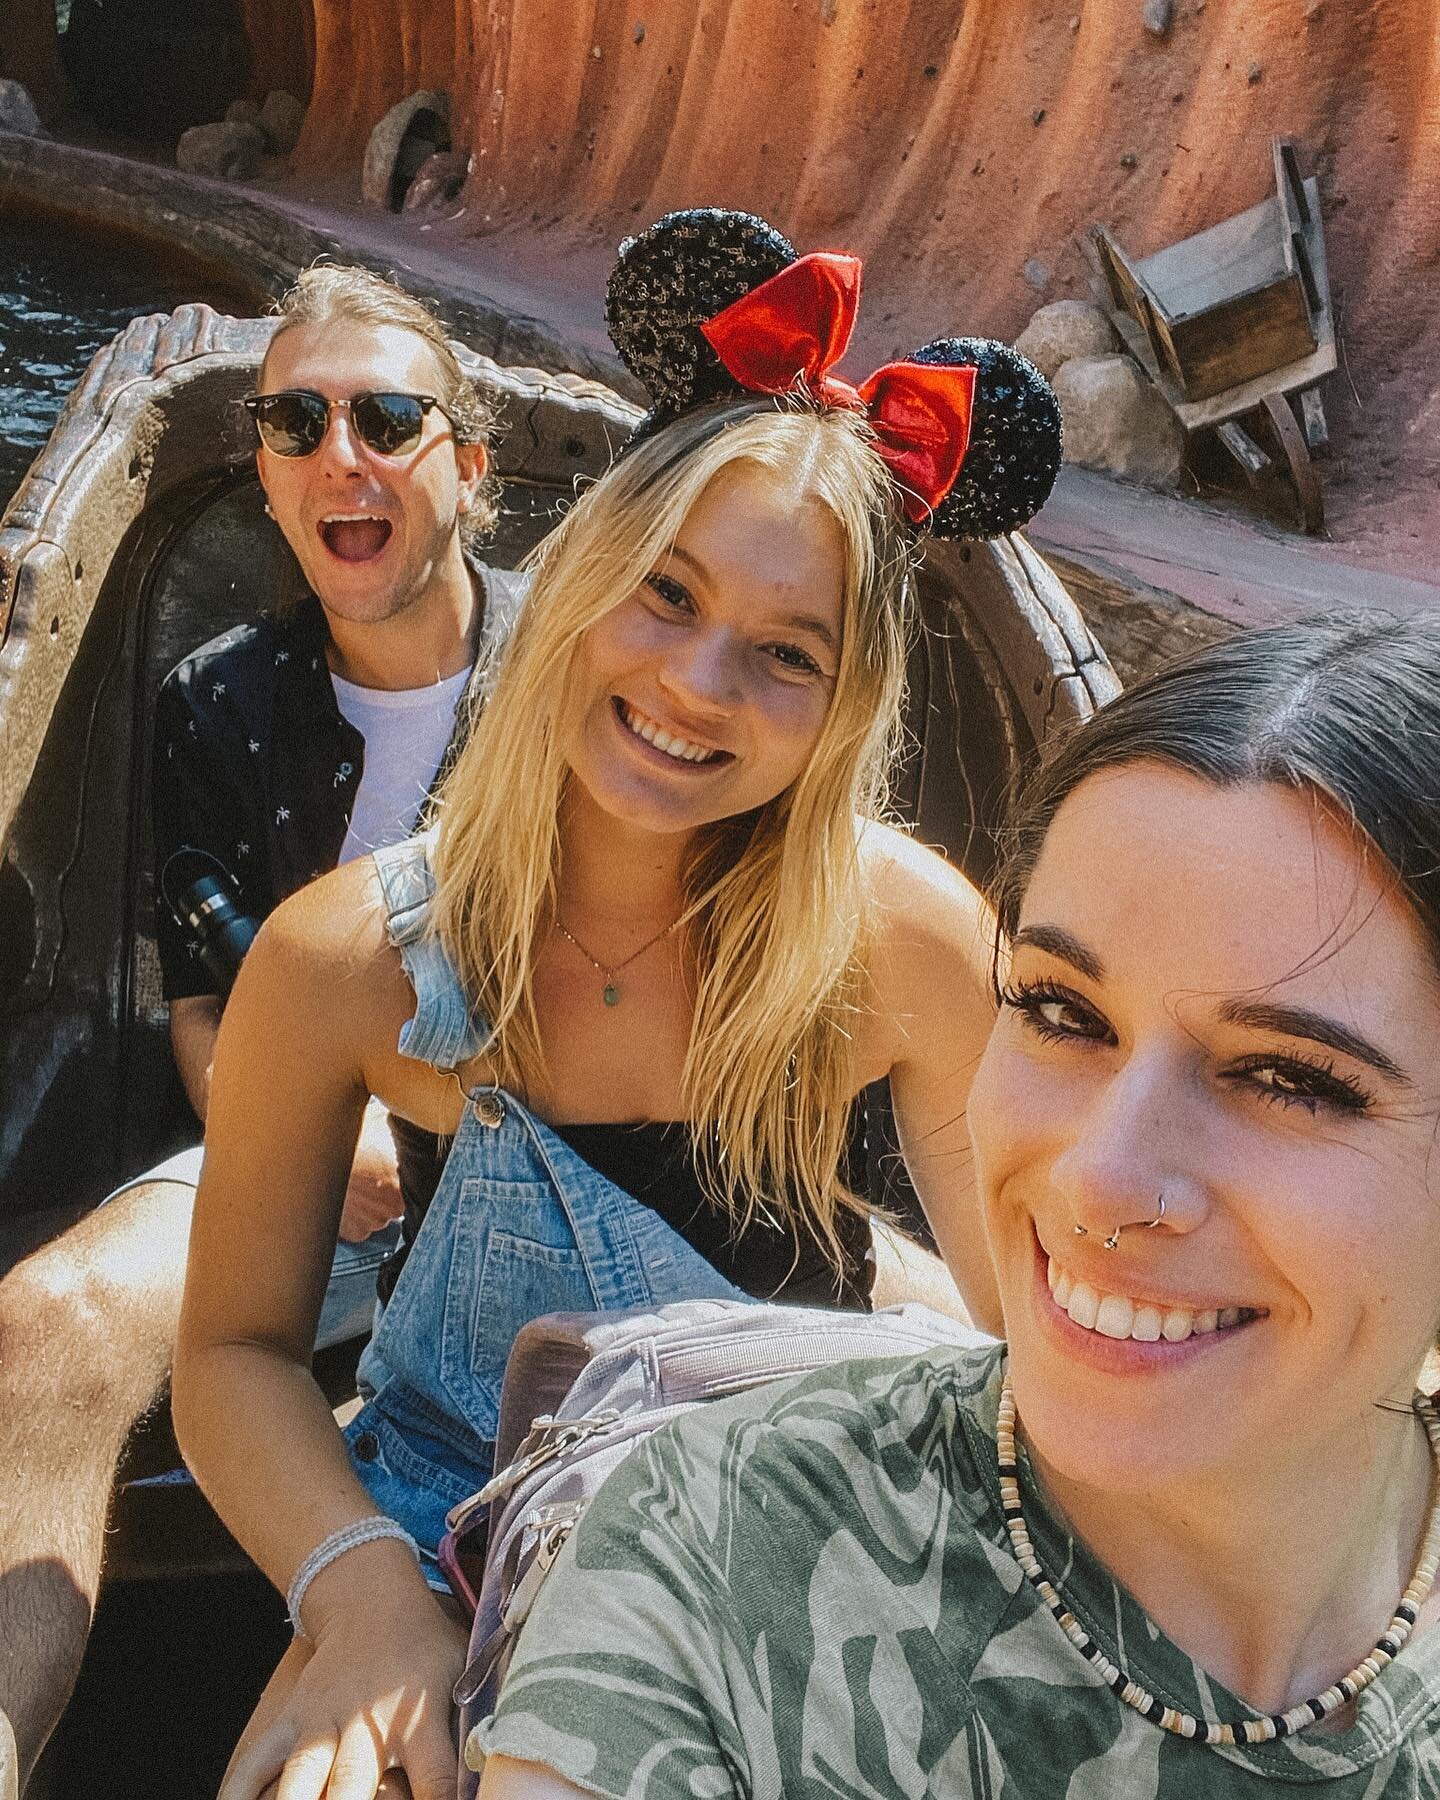 summertime = more disneytime ☀️

Such a joy taking this past week off to spend some time at the Happiest Place on Earth with @_jennabowers_ and @kenziepeay